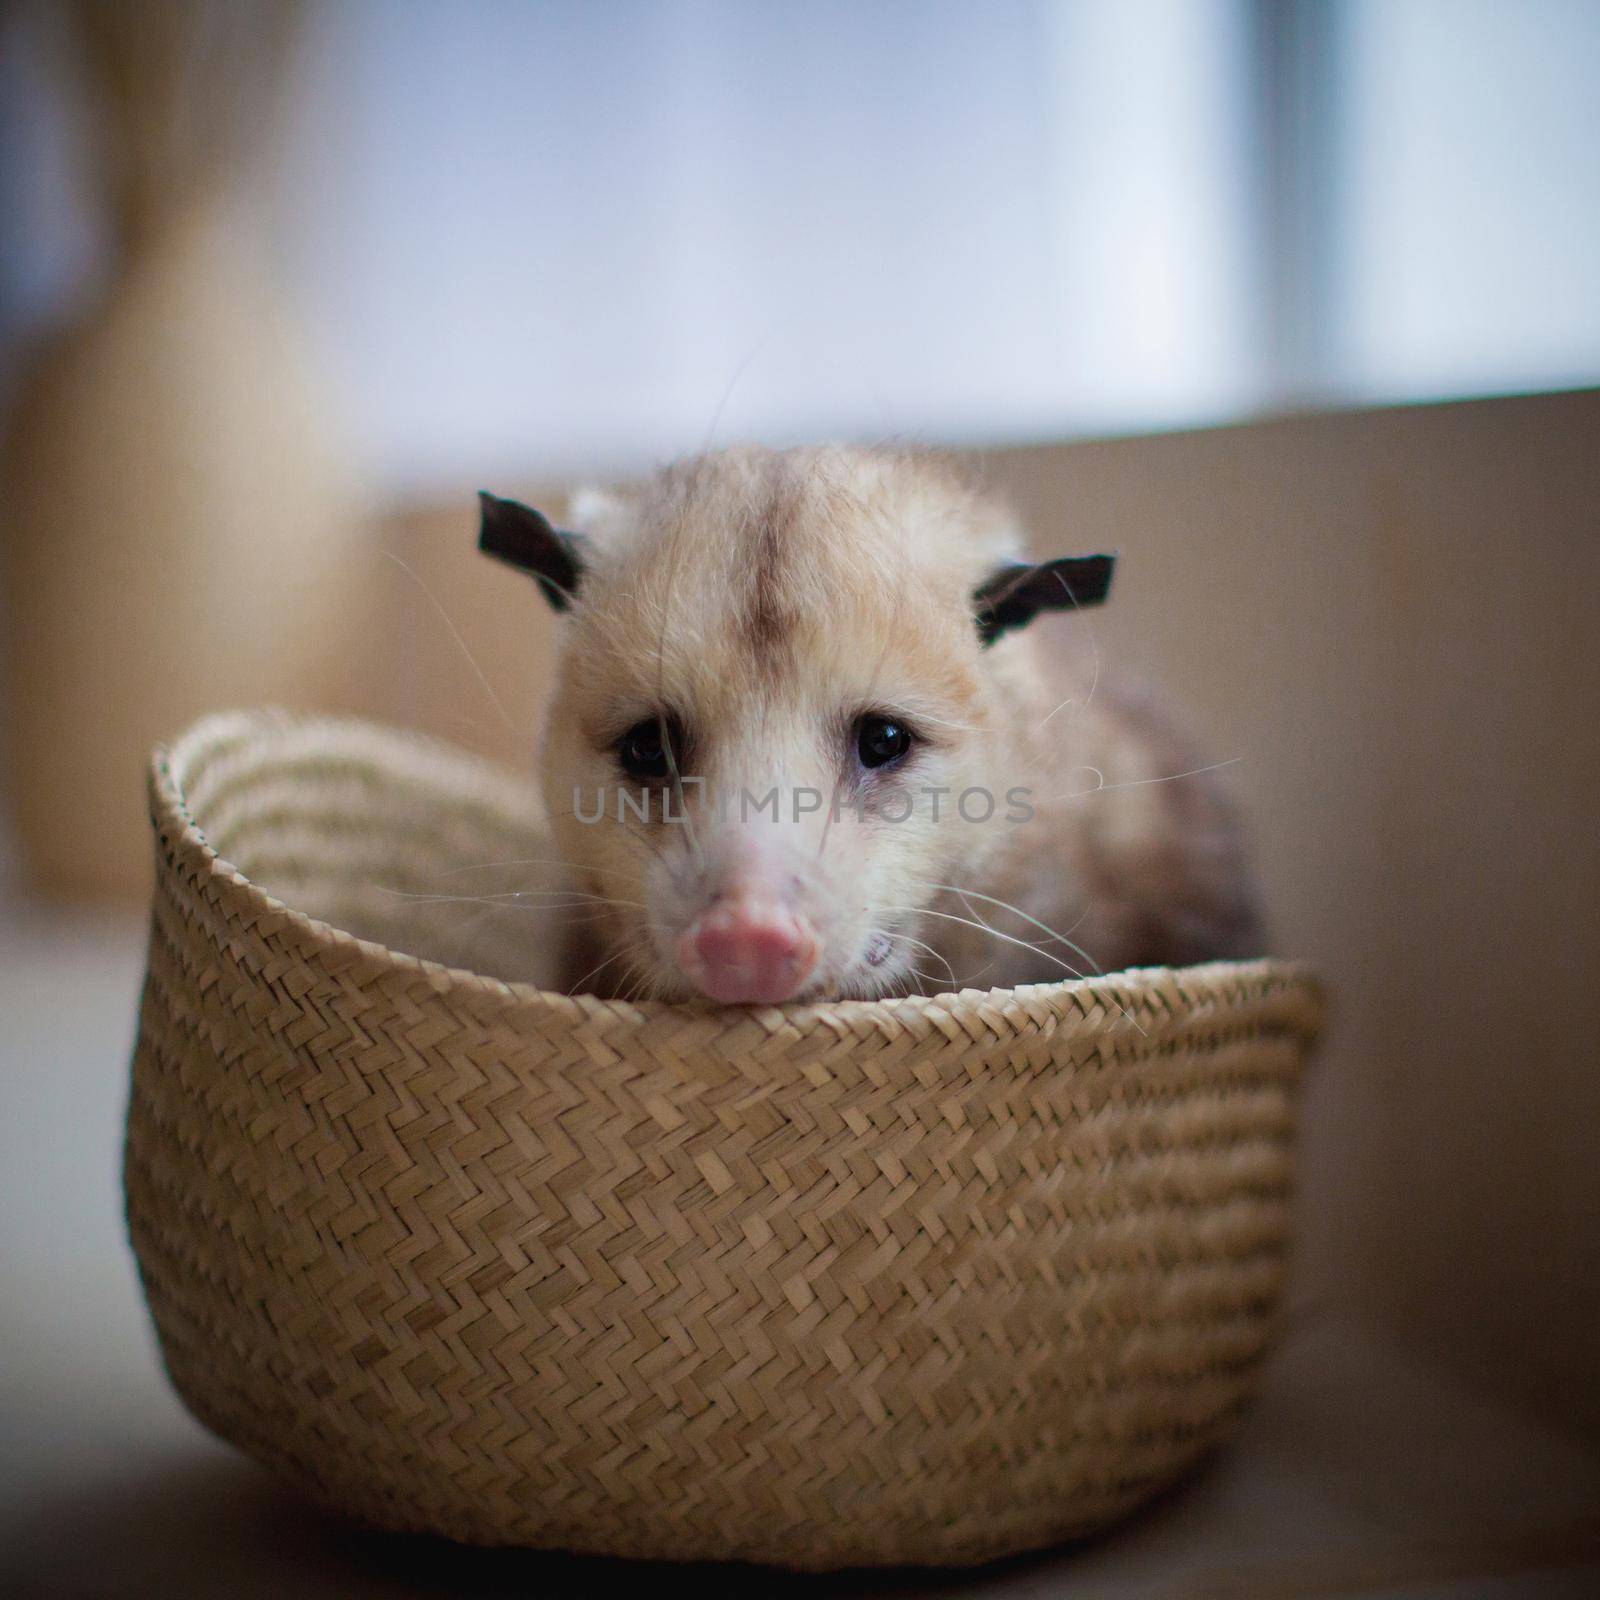 The Virginia opossum, Didelphis virginiana, in a basket by RosaJay